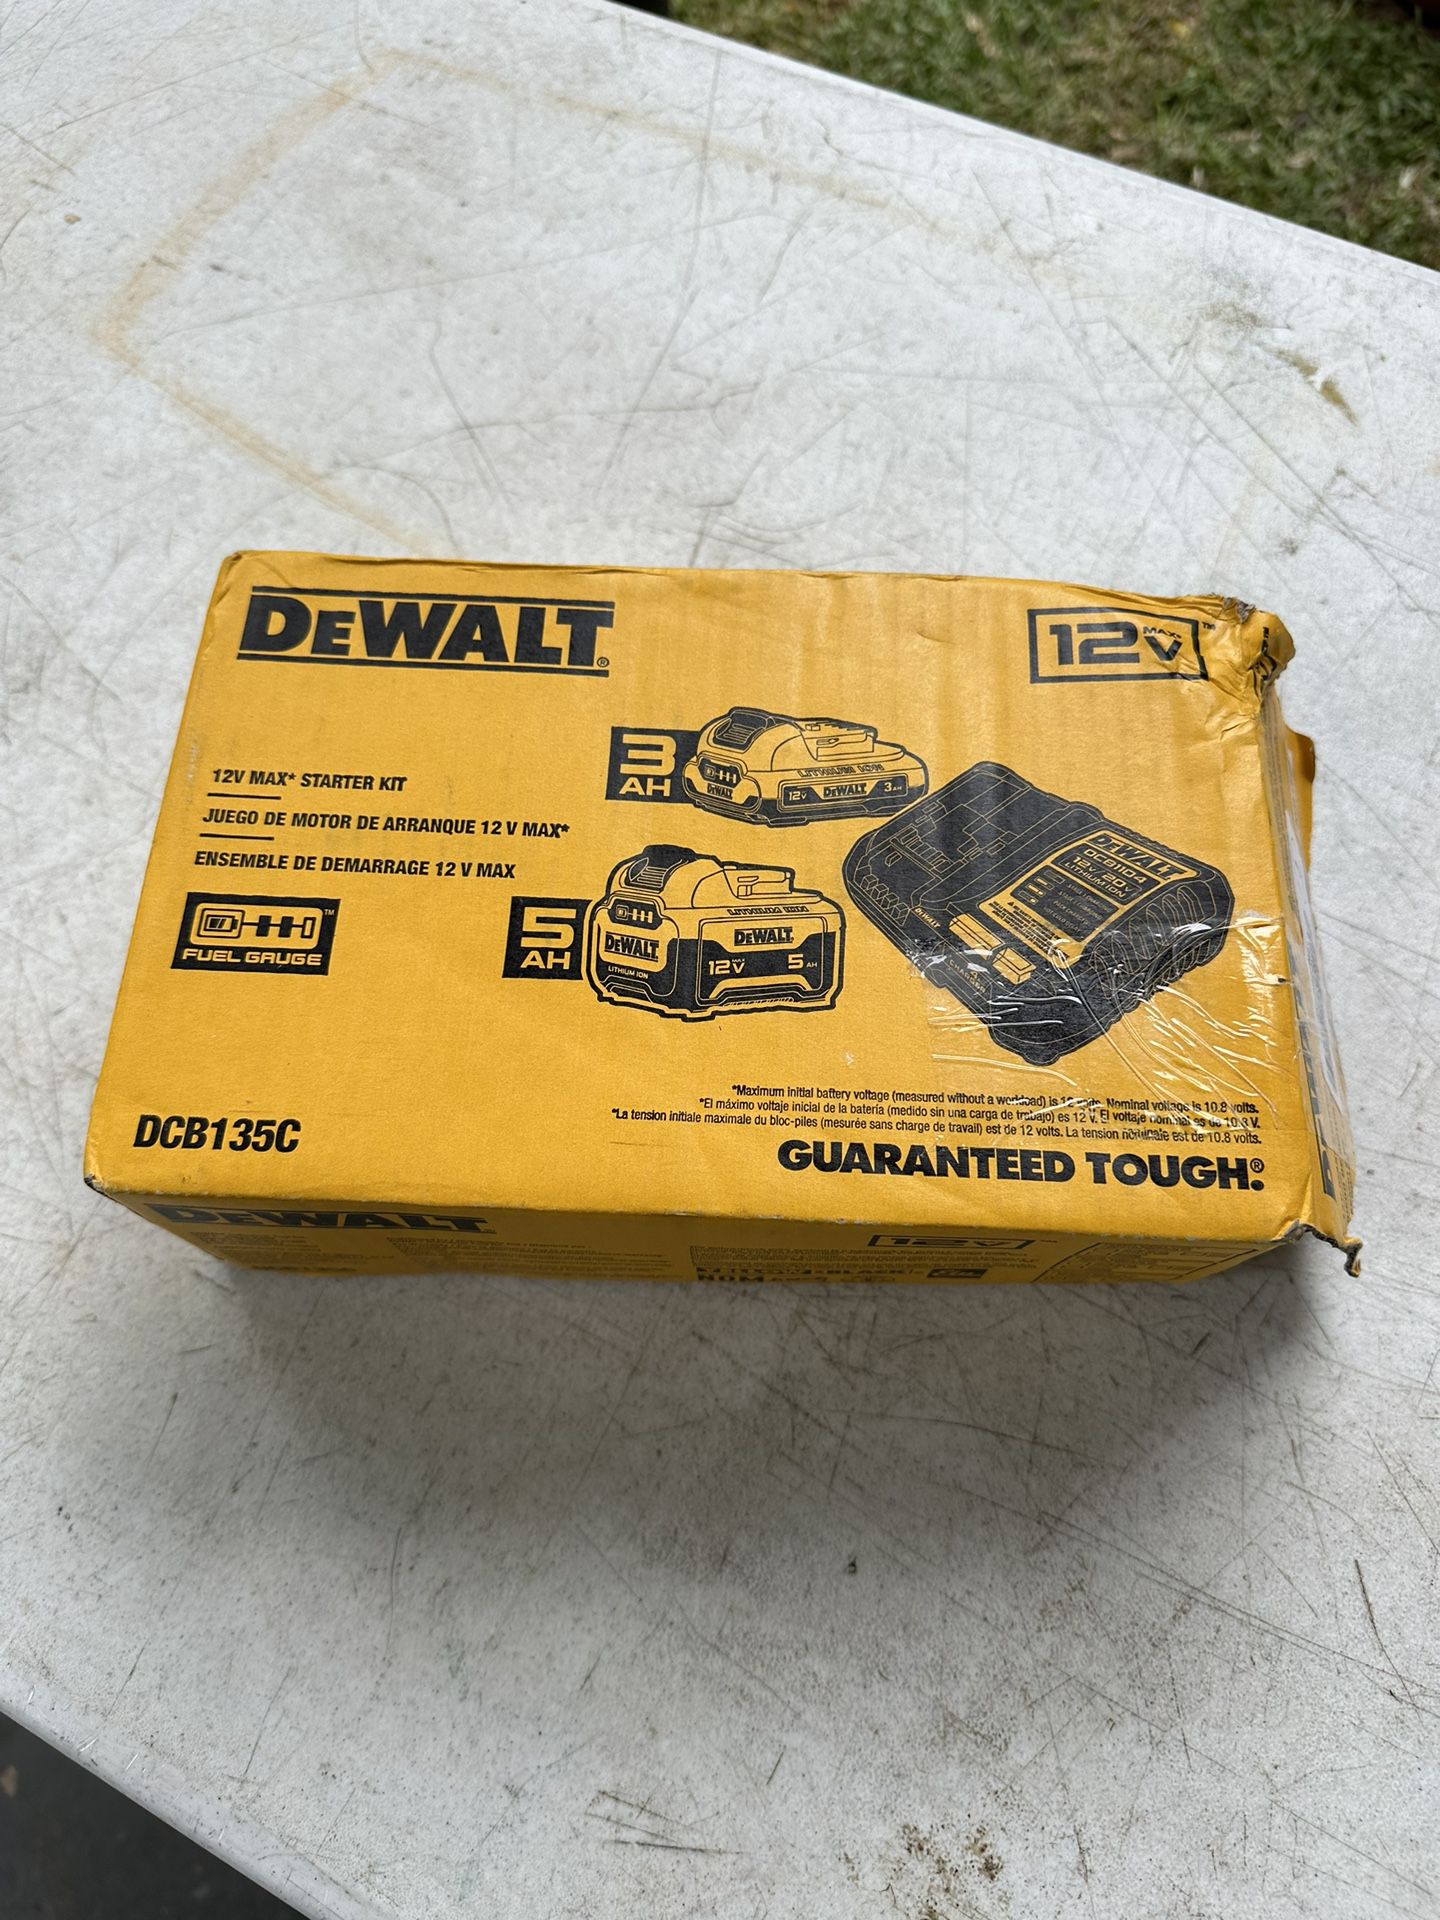 Dewalt 12-V 2-Pack Lithium-ion Battery and Charger (3ah and 5ah)